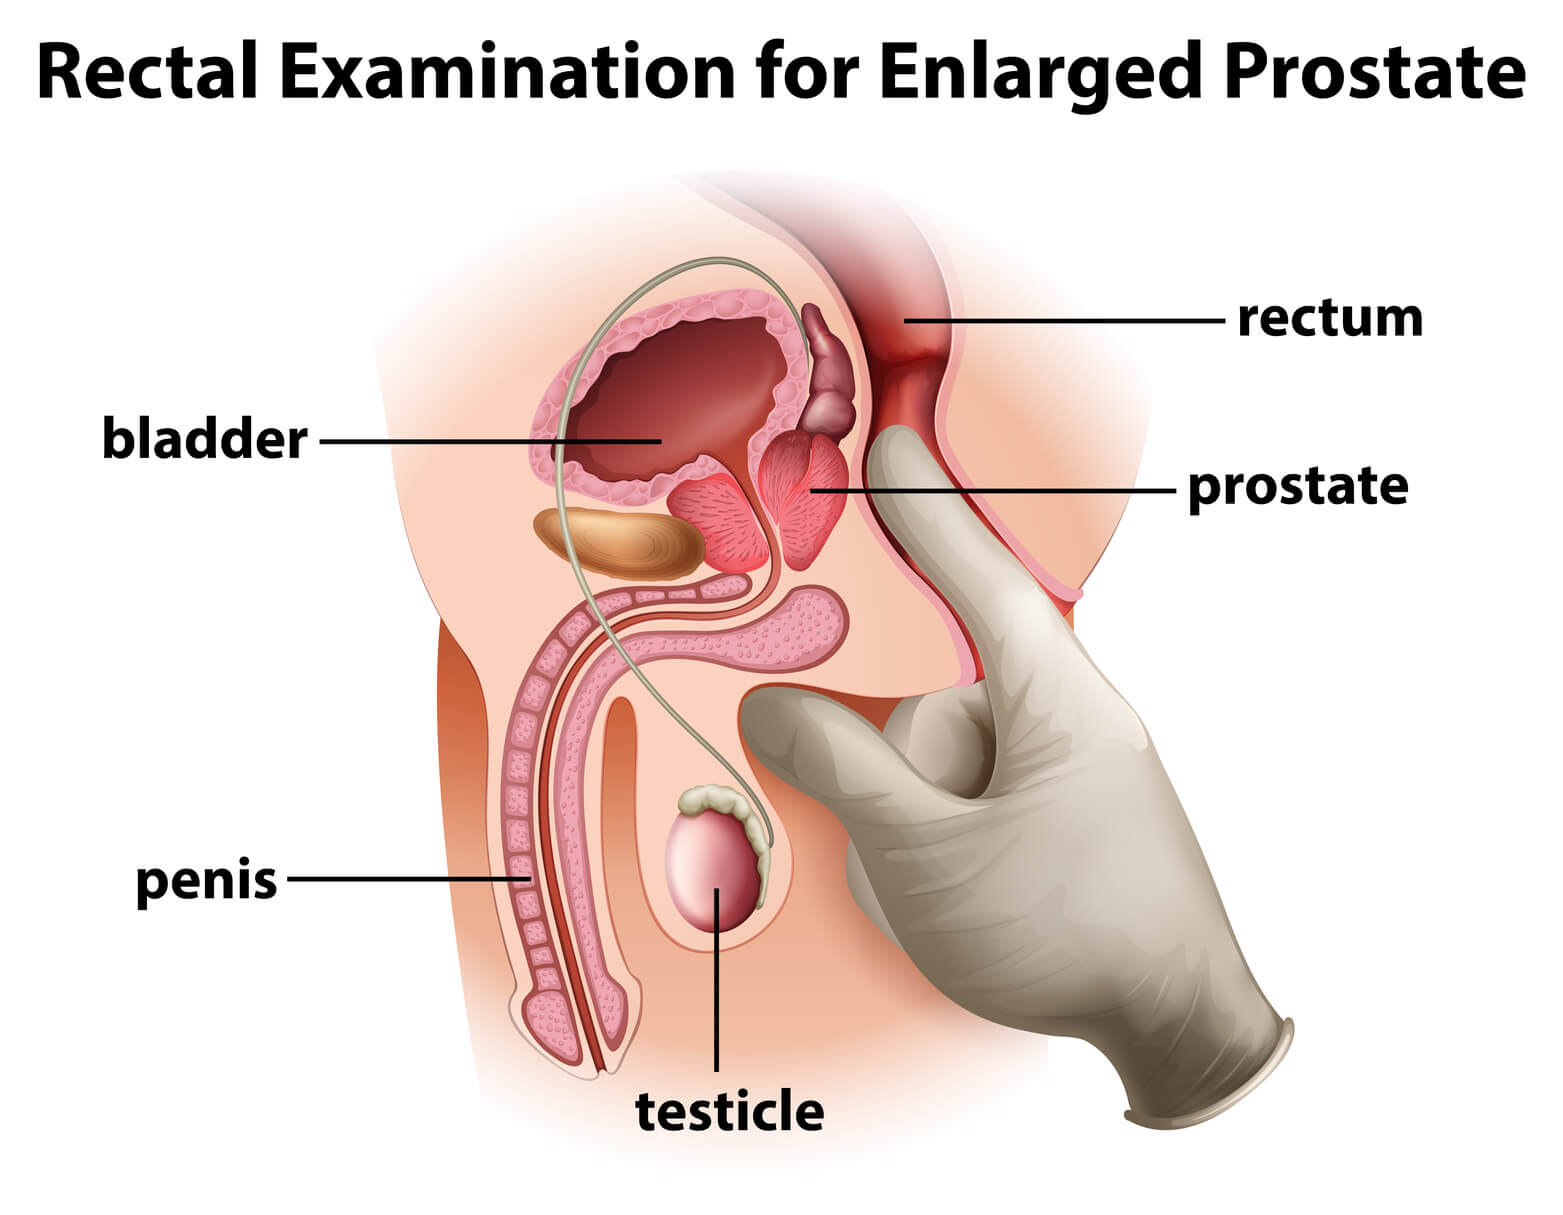 Where is the prostate gland located in the Body